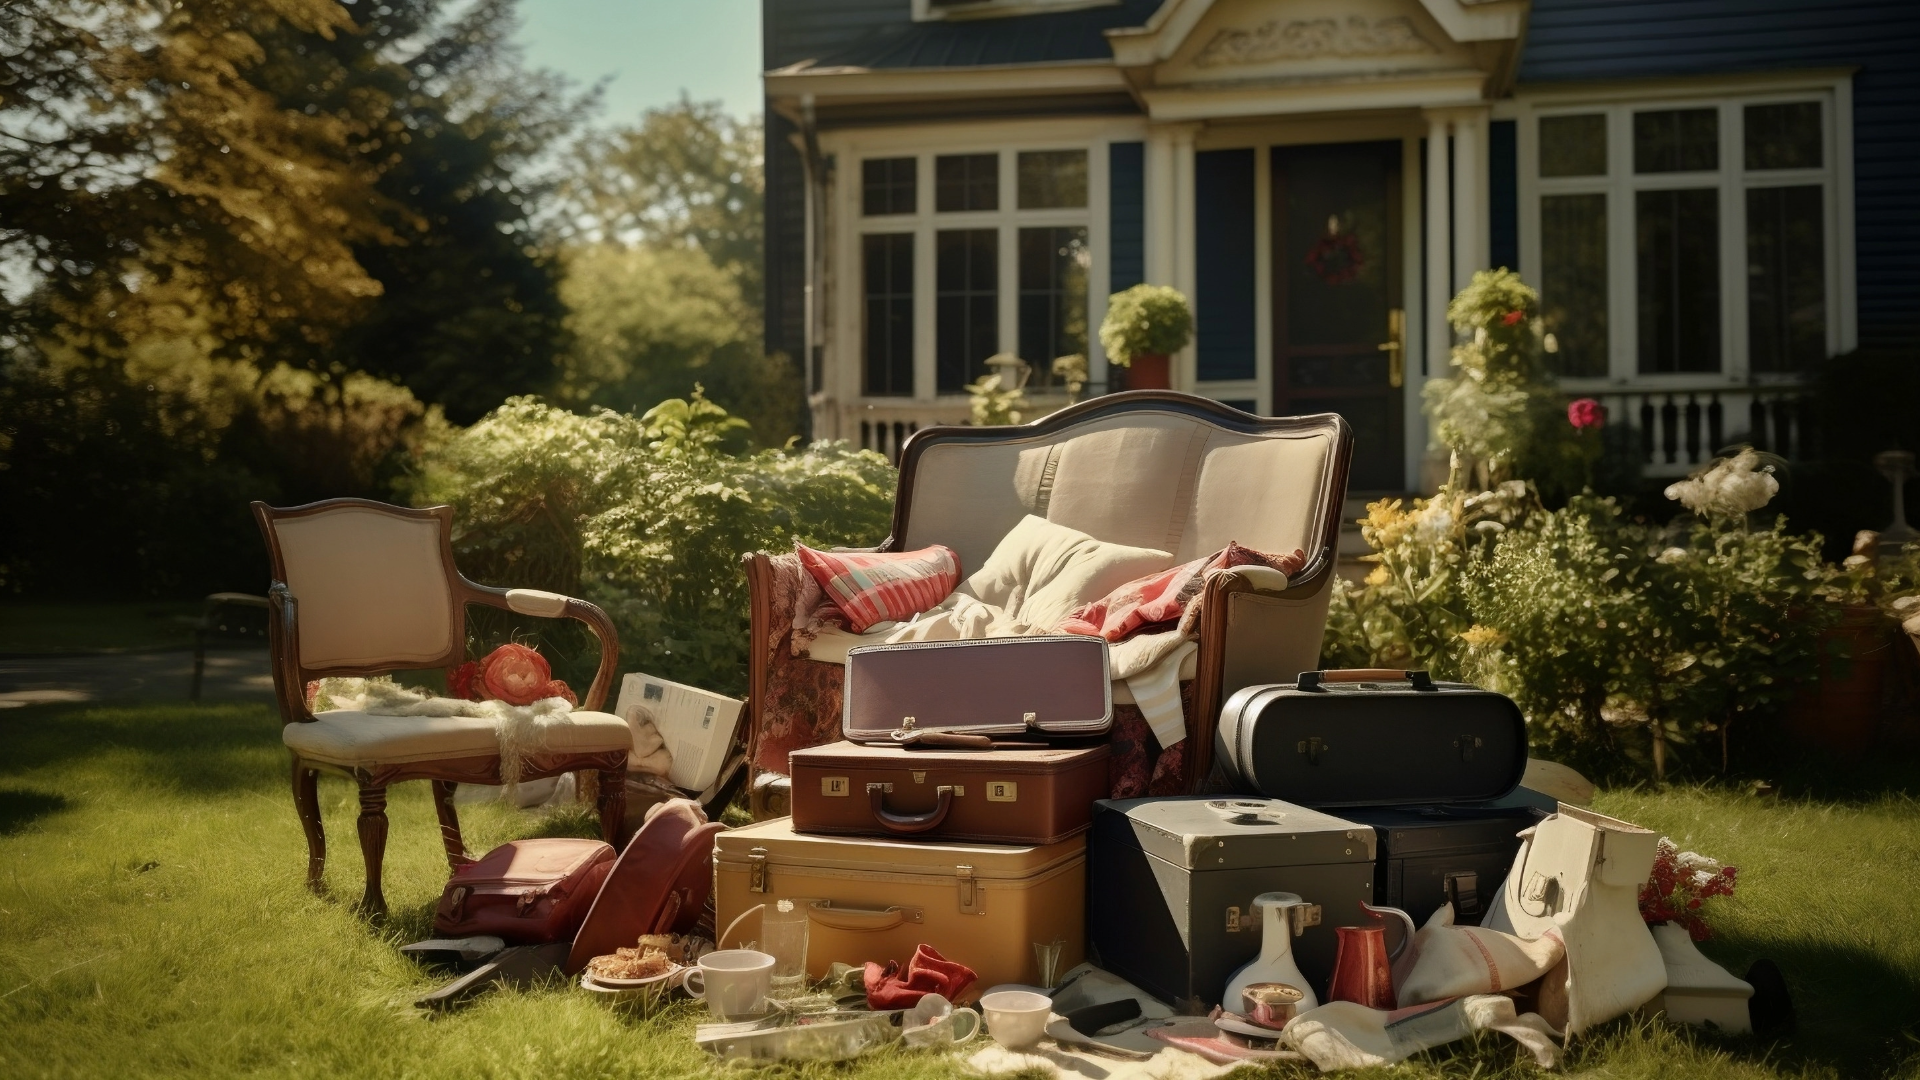 A bunch of old furniture and other household items sits in the yard in front of a home waiting for a KEI dumpster rental to dispose of the items.